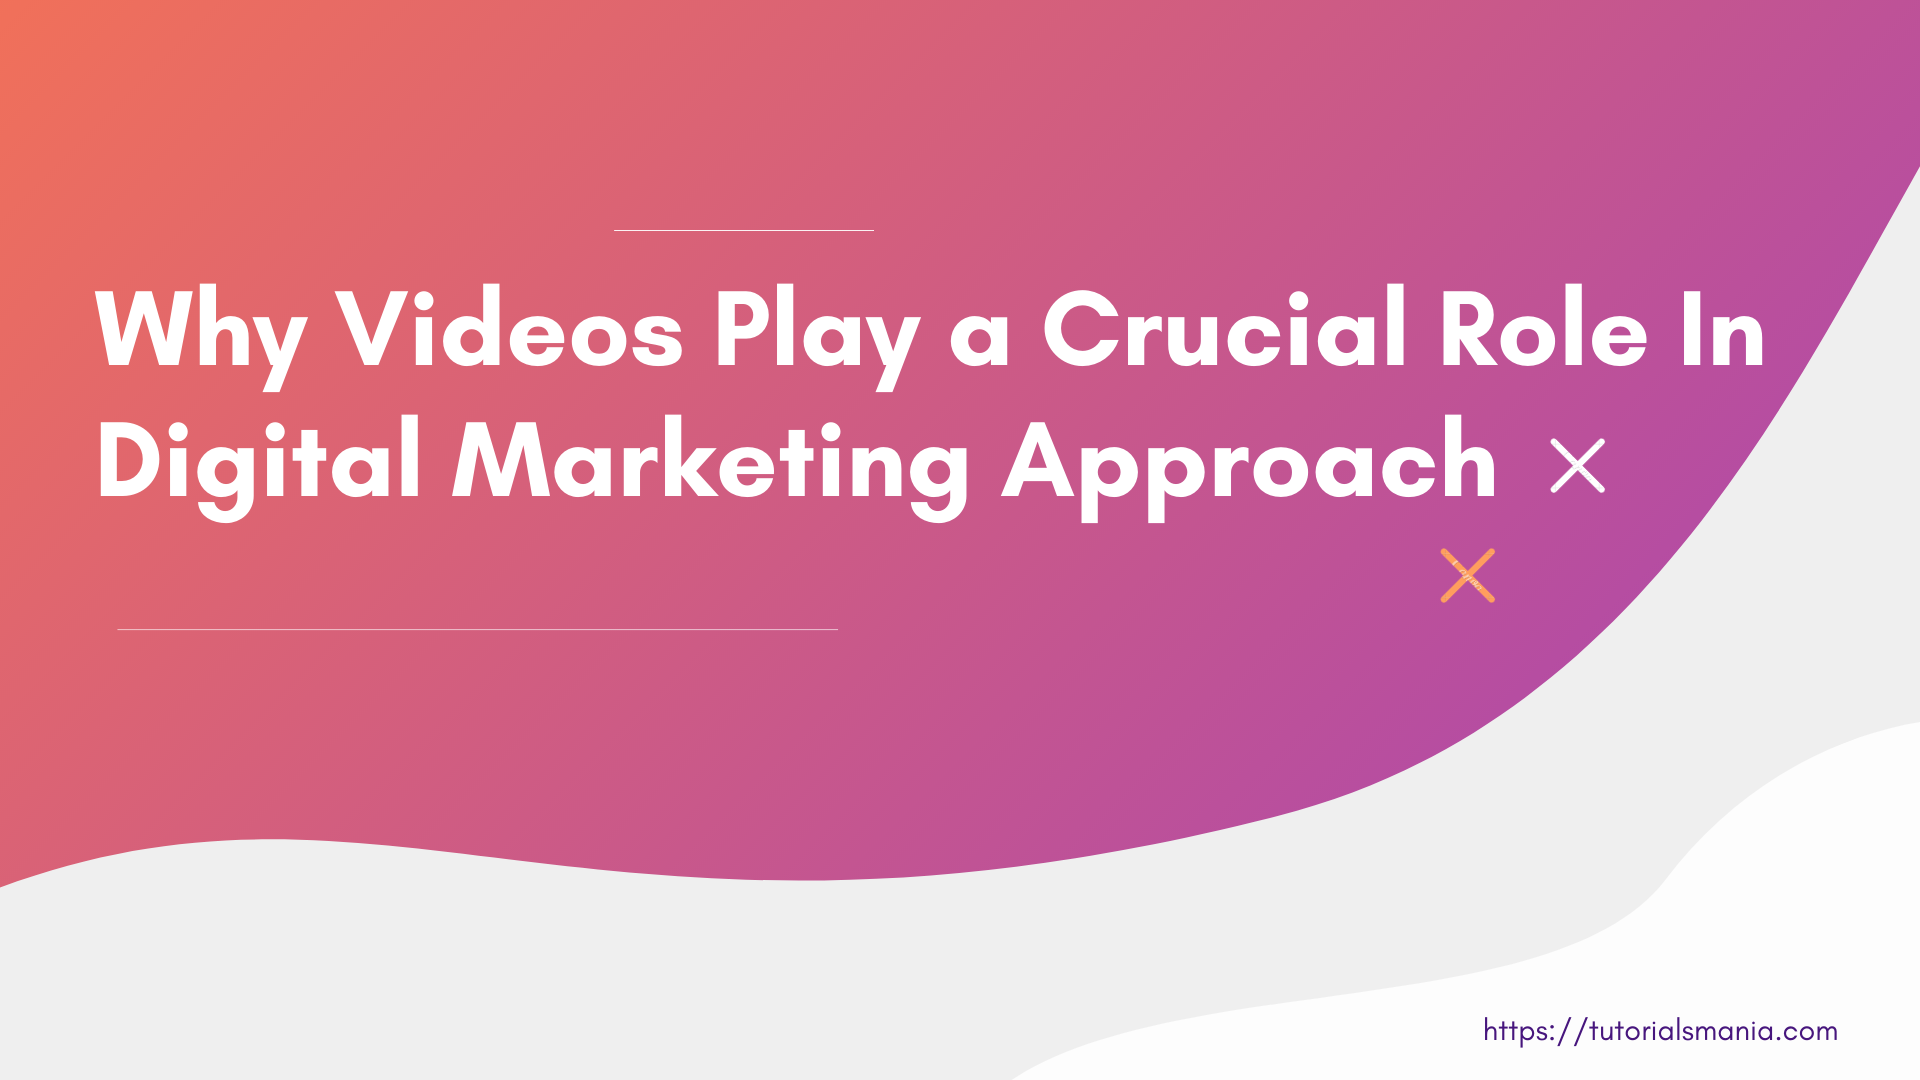 Why Videos Play a Crucial Role in digital marketing approach